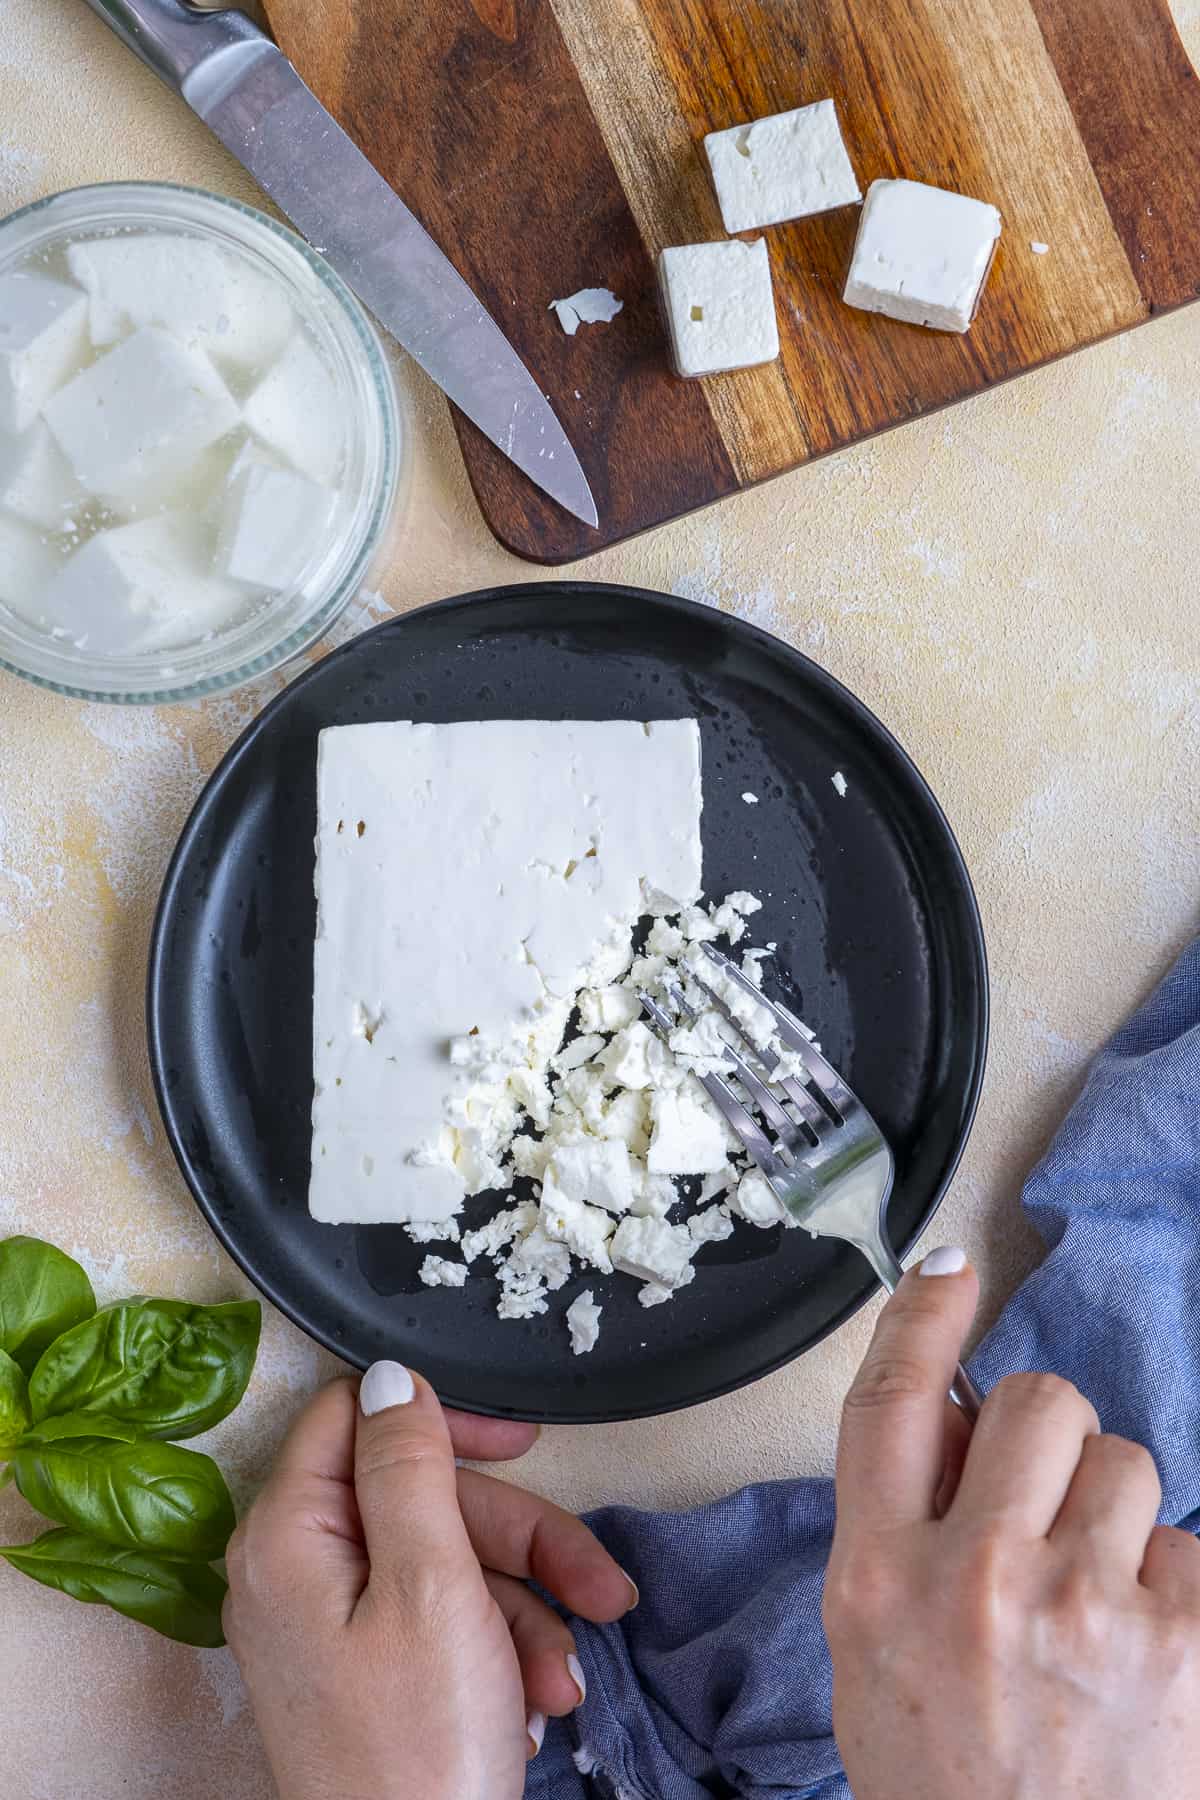 Hands breaking feta cheese with fork.